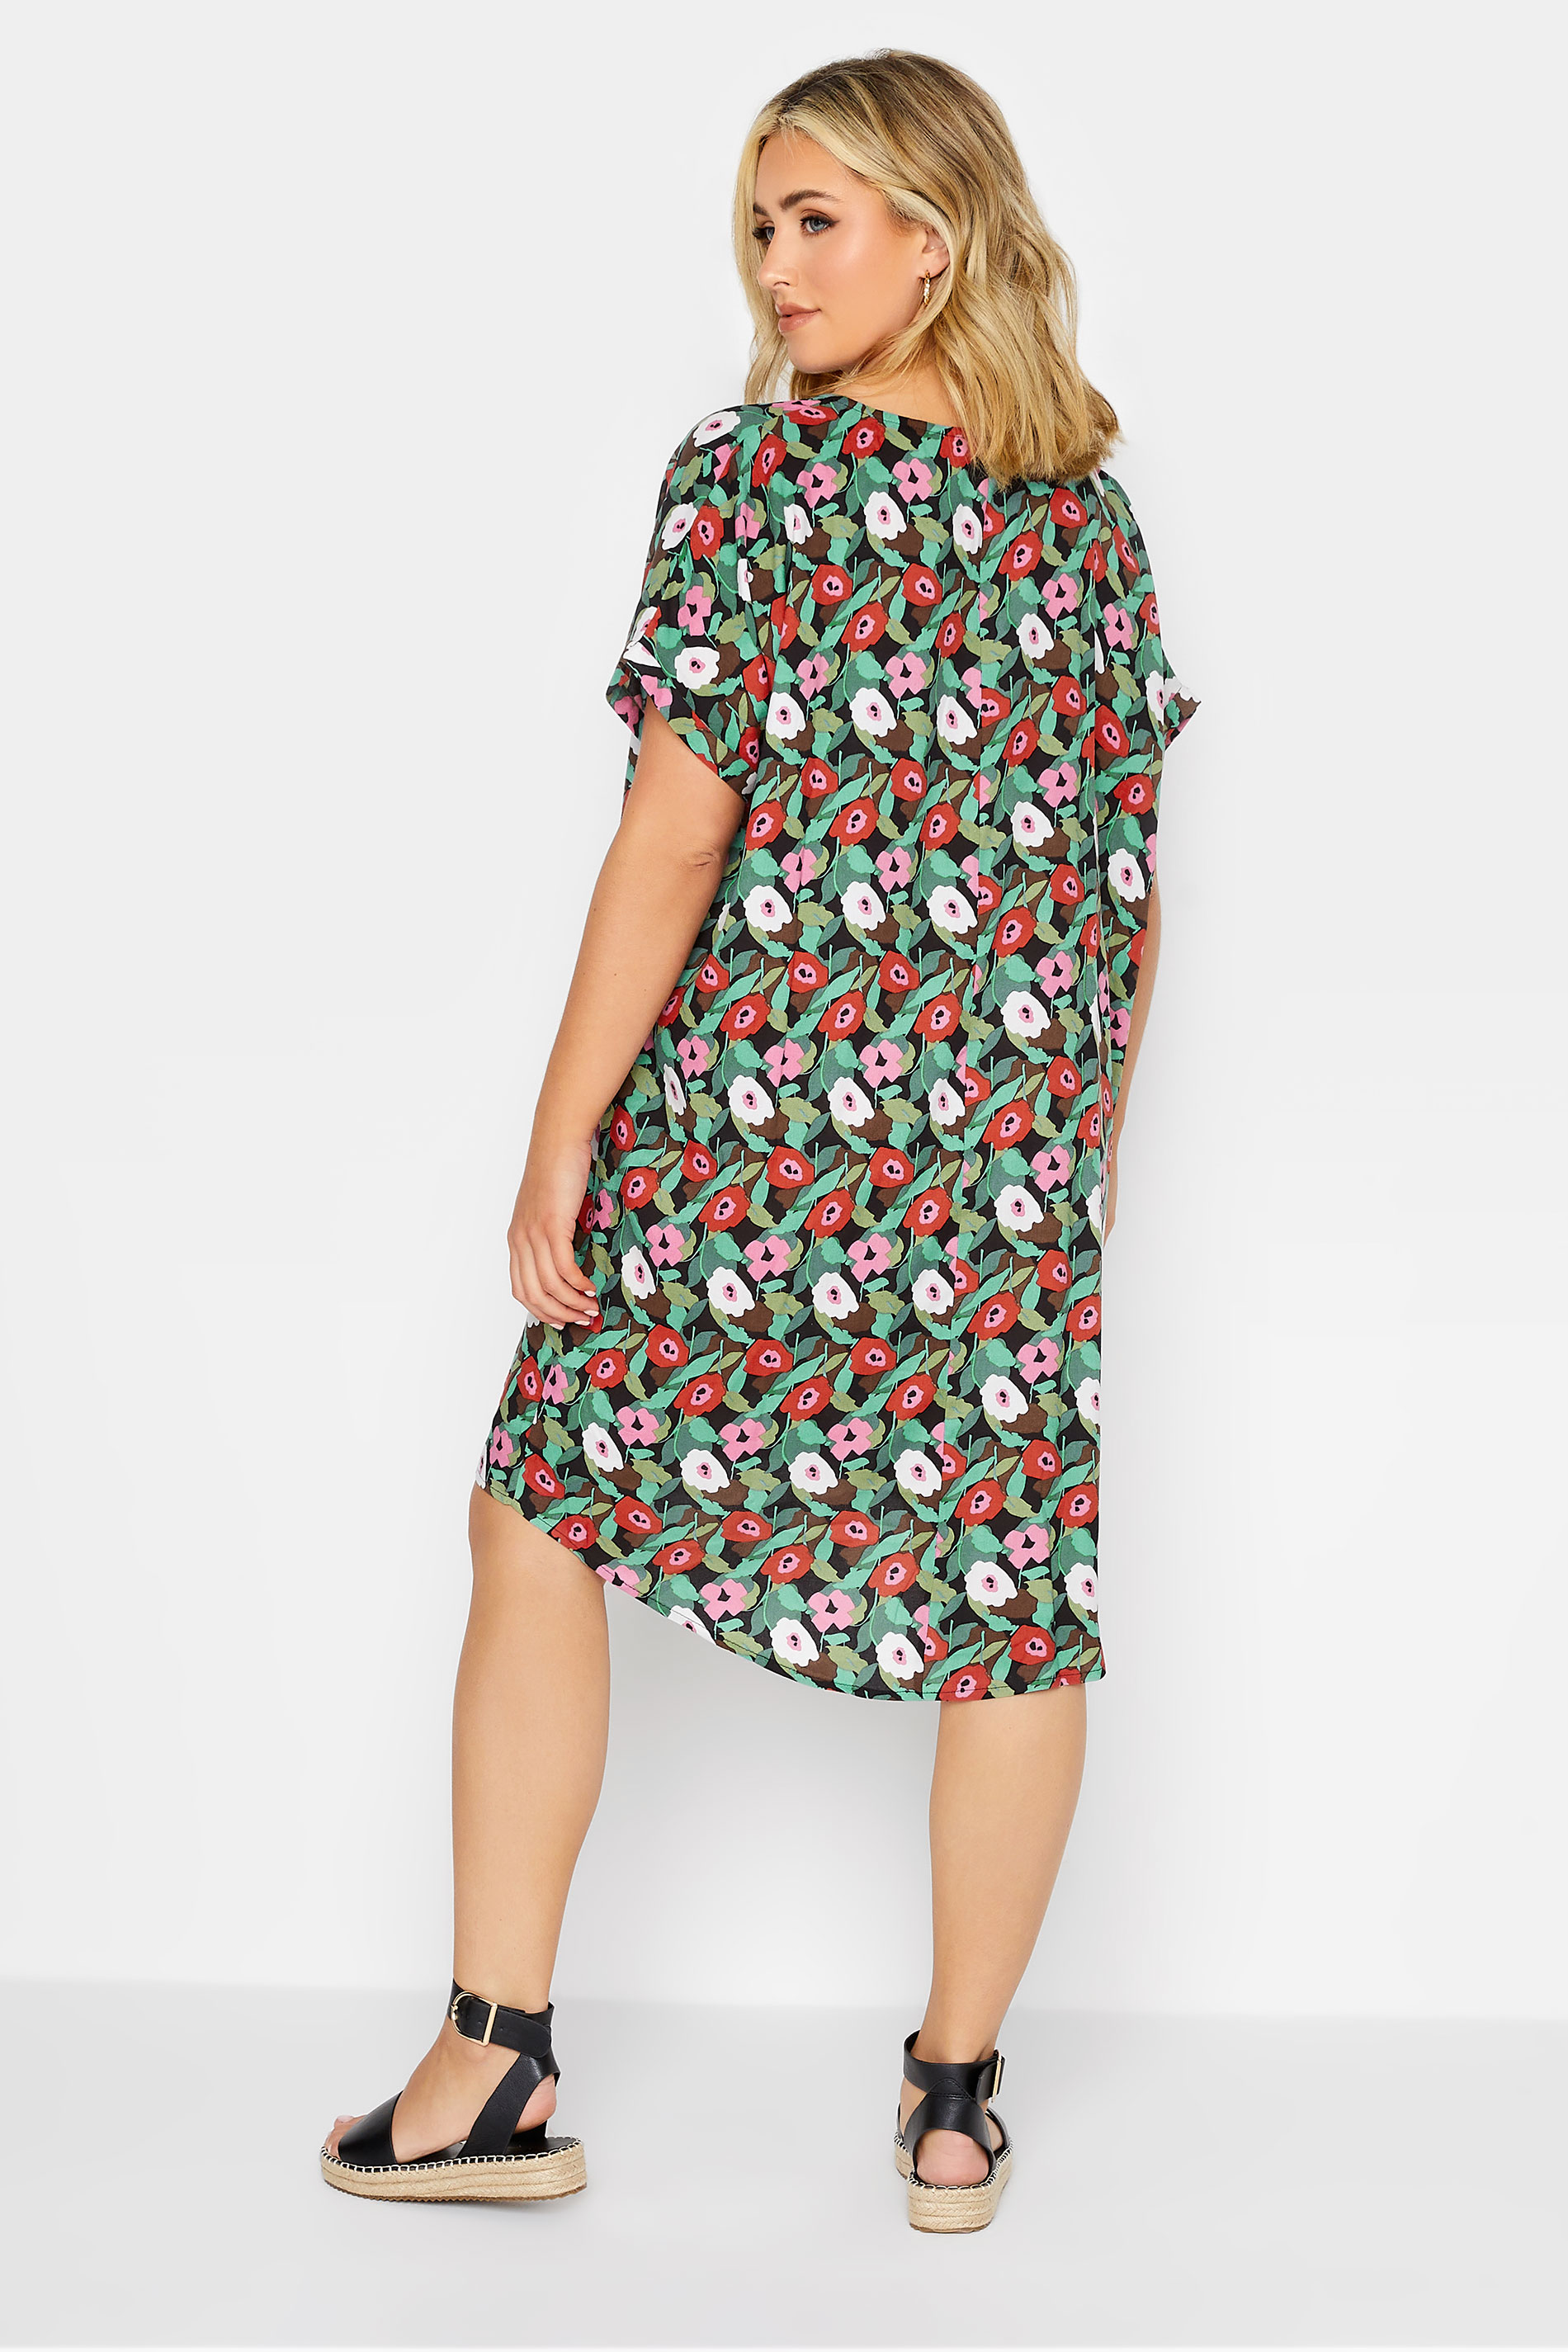 YOURS Plus Size Black Floral Print Dipped Hem Shift Dress | Yours Clothing 3